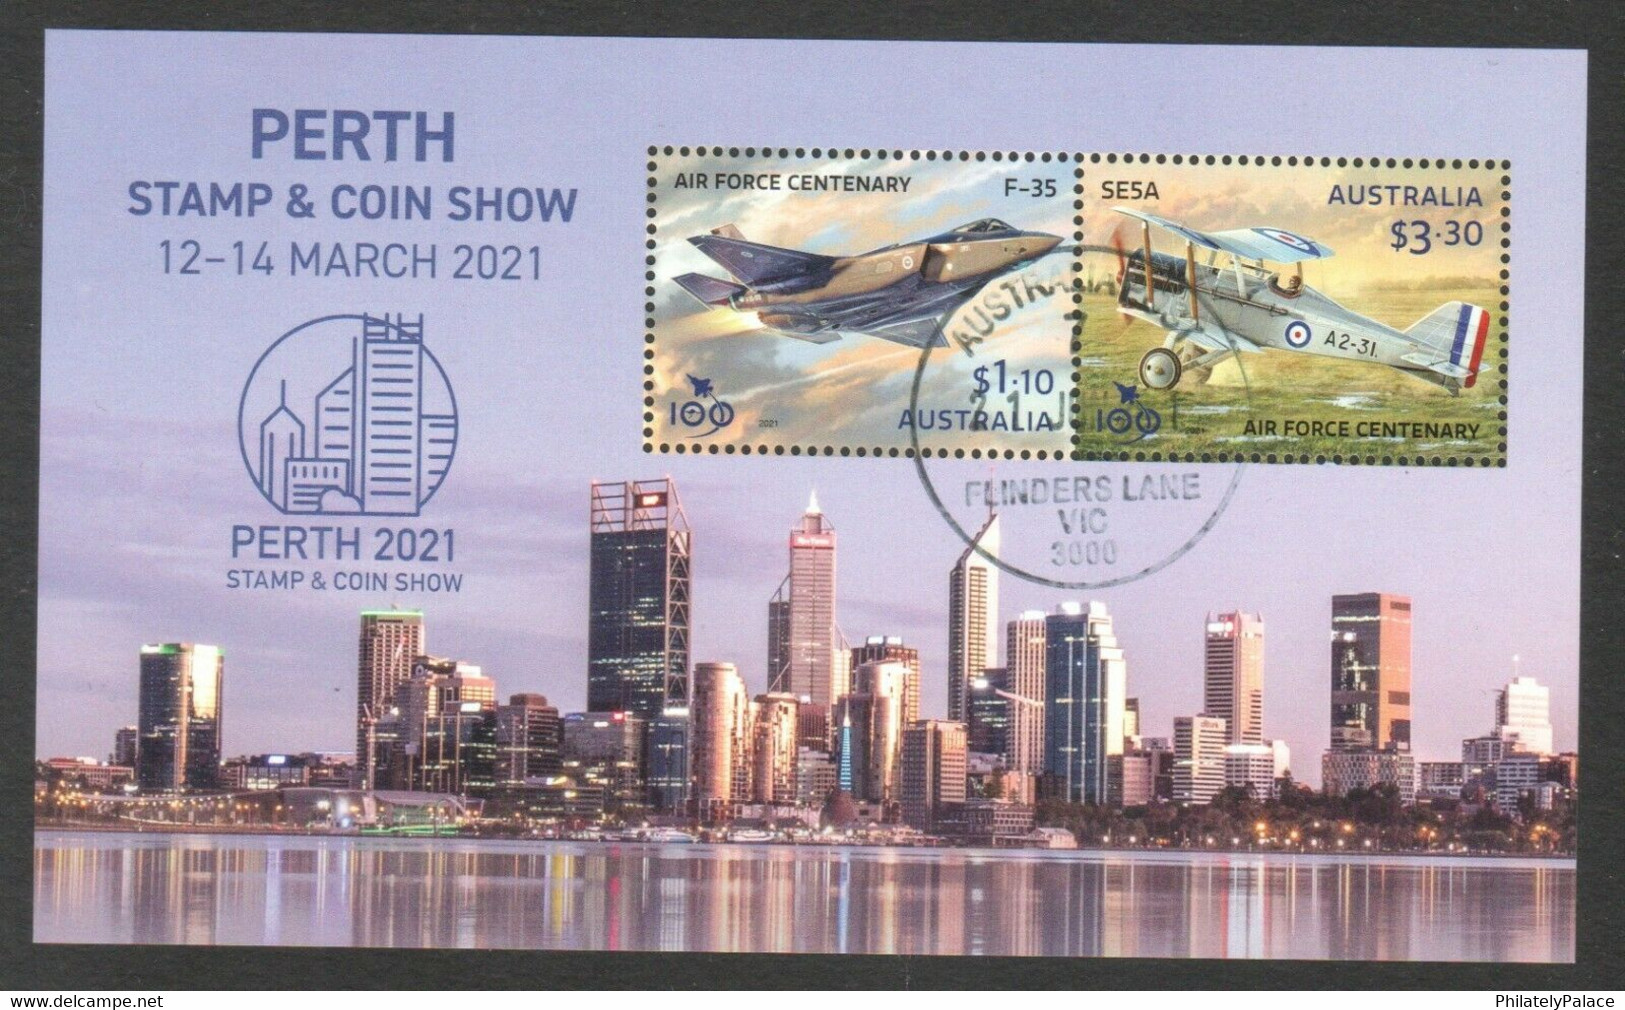 AUSTRALIA 2021 PERTH STAMP SHOW (RAAF CENTENARY) SOUVENIR SHEET OF 2 STAMPS USED  (**) - Gebraucht